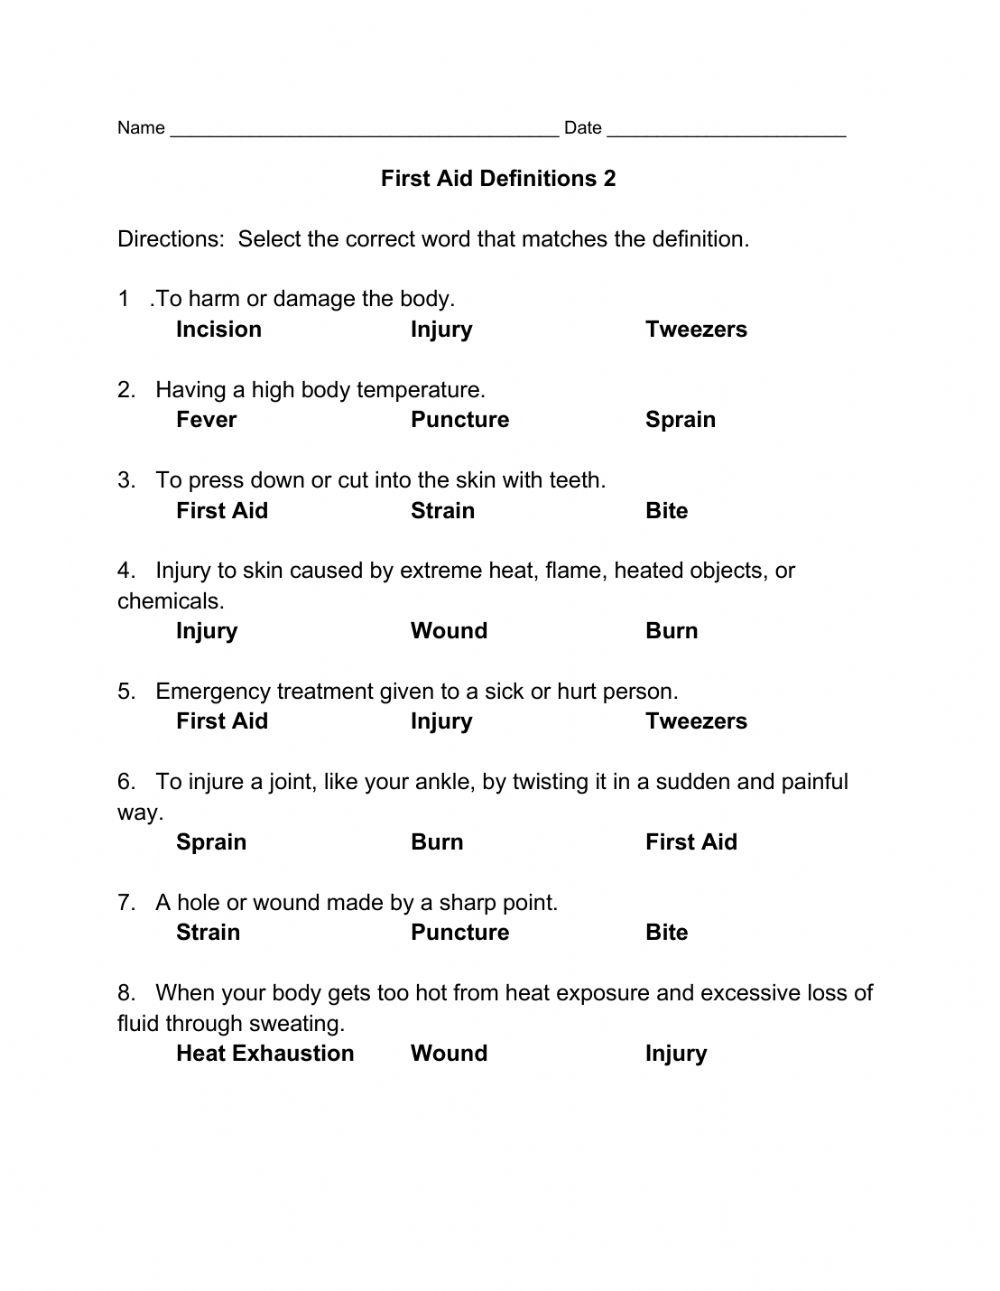 First aid definitions 2